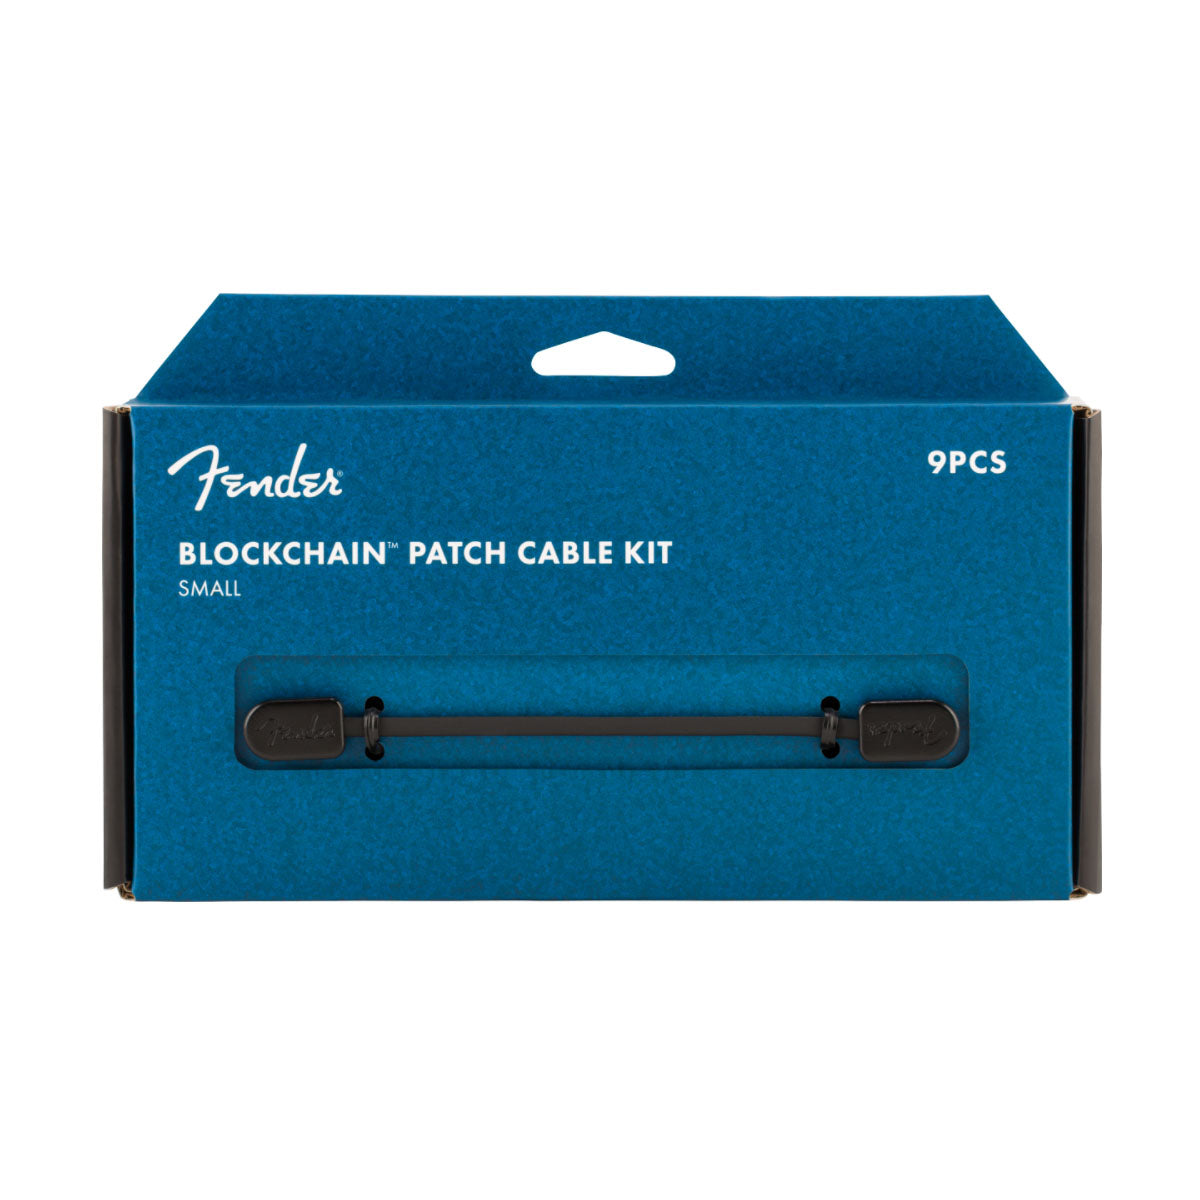 Fender Blockchain Patch Cable Kit Black Small - 0990825202